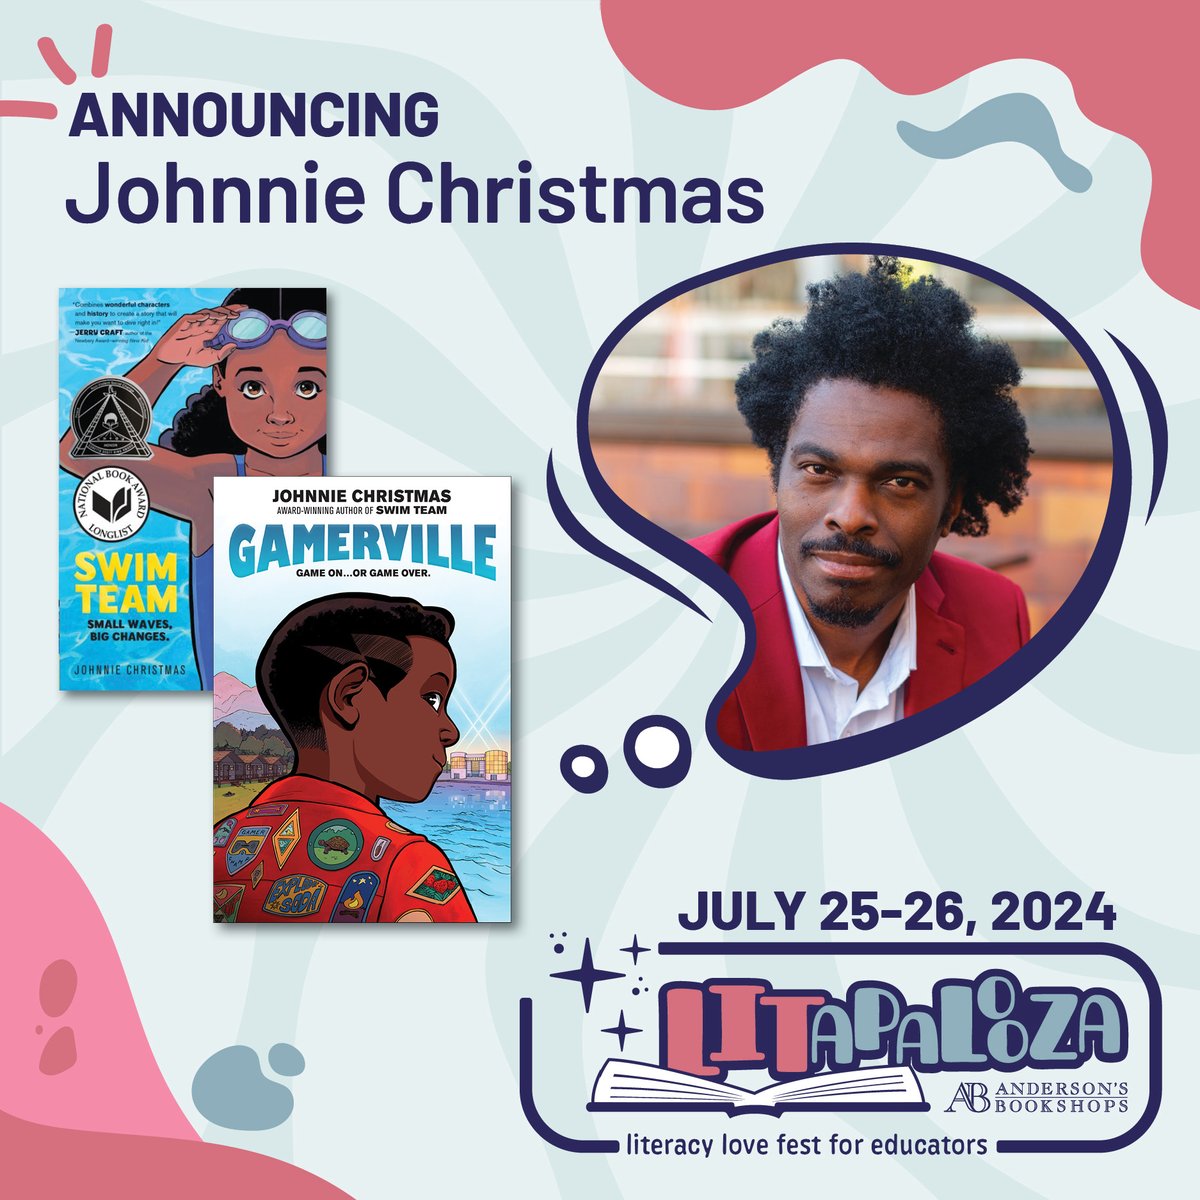 We can't WAIT to see Johnnie Christmas @j_xmas in breakout panels! He will hang out with YOU for two days of literacy love, breakout sessions and author signings geared towards educators! More details and register here: LITapalooza2024.eventcombo.com